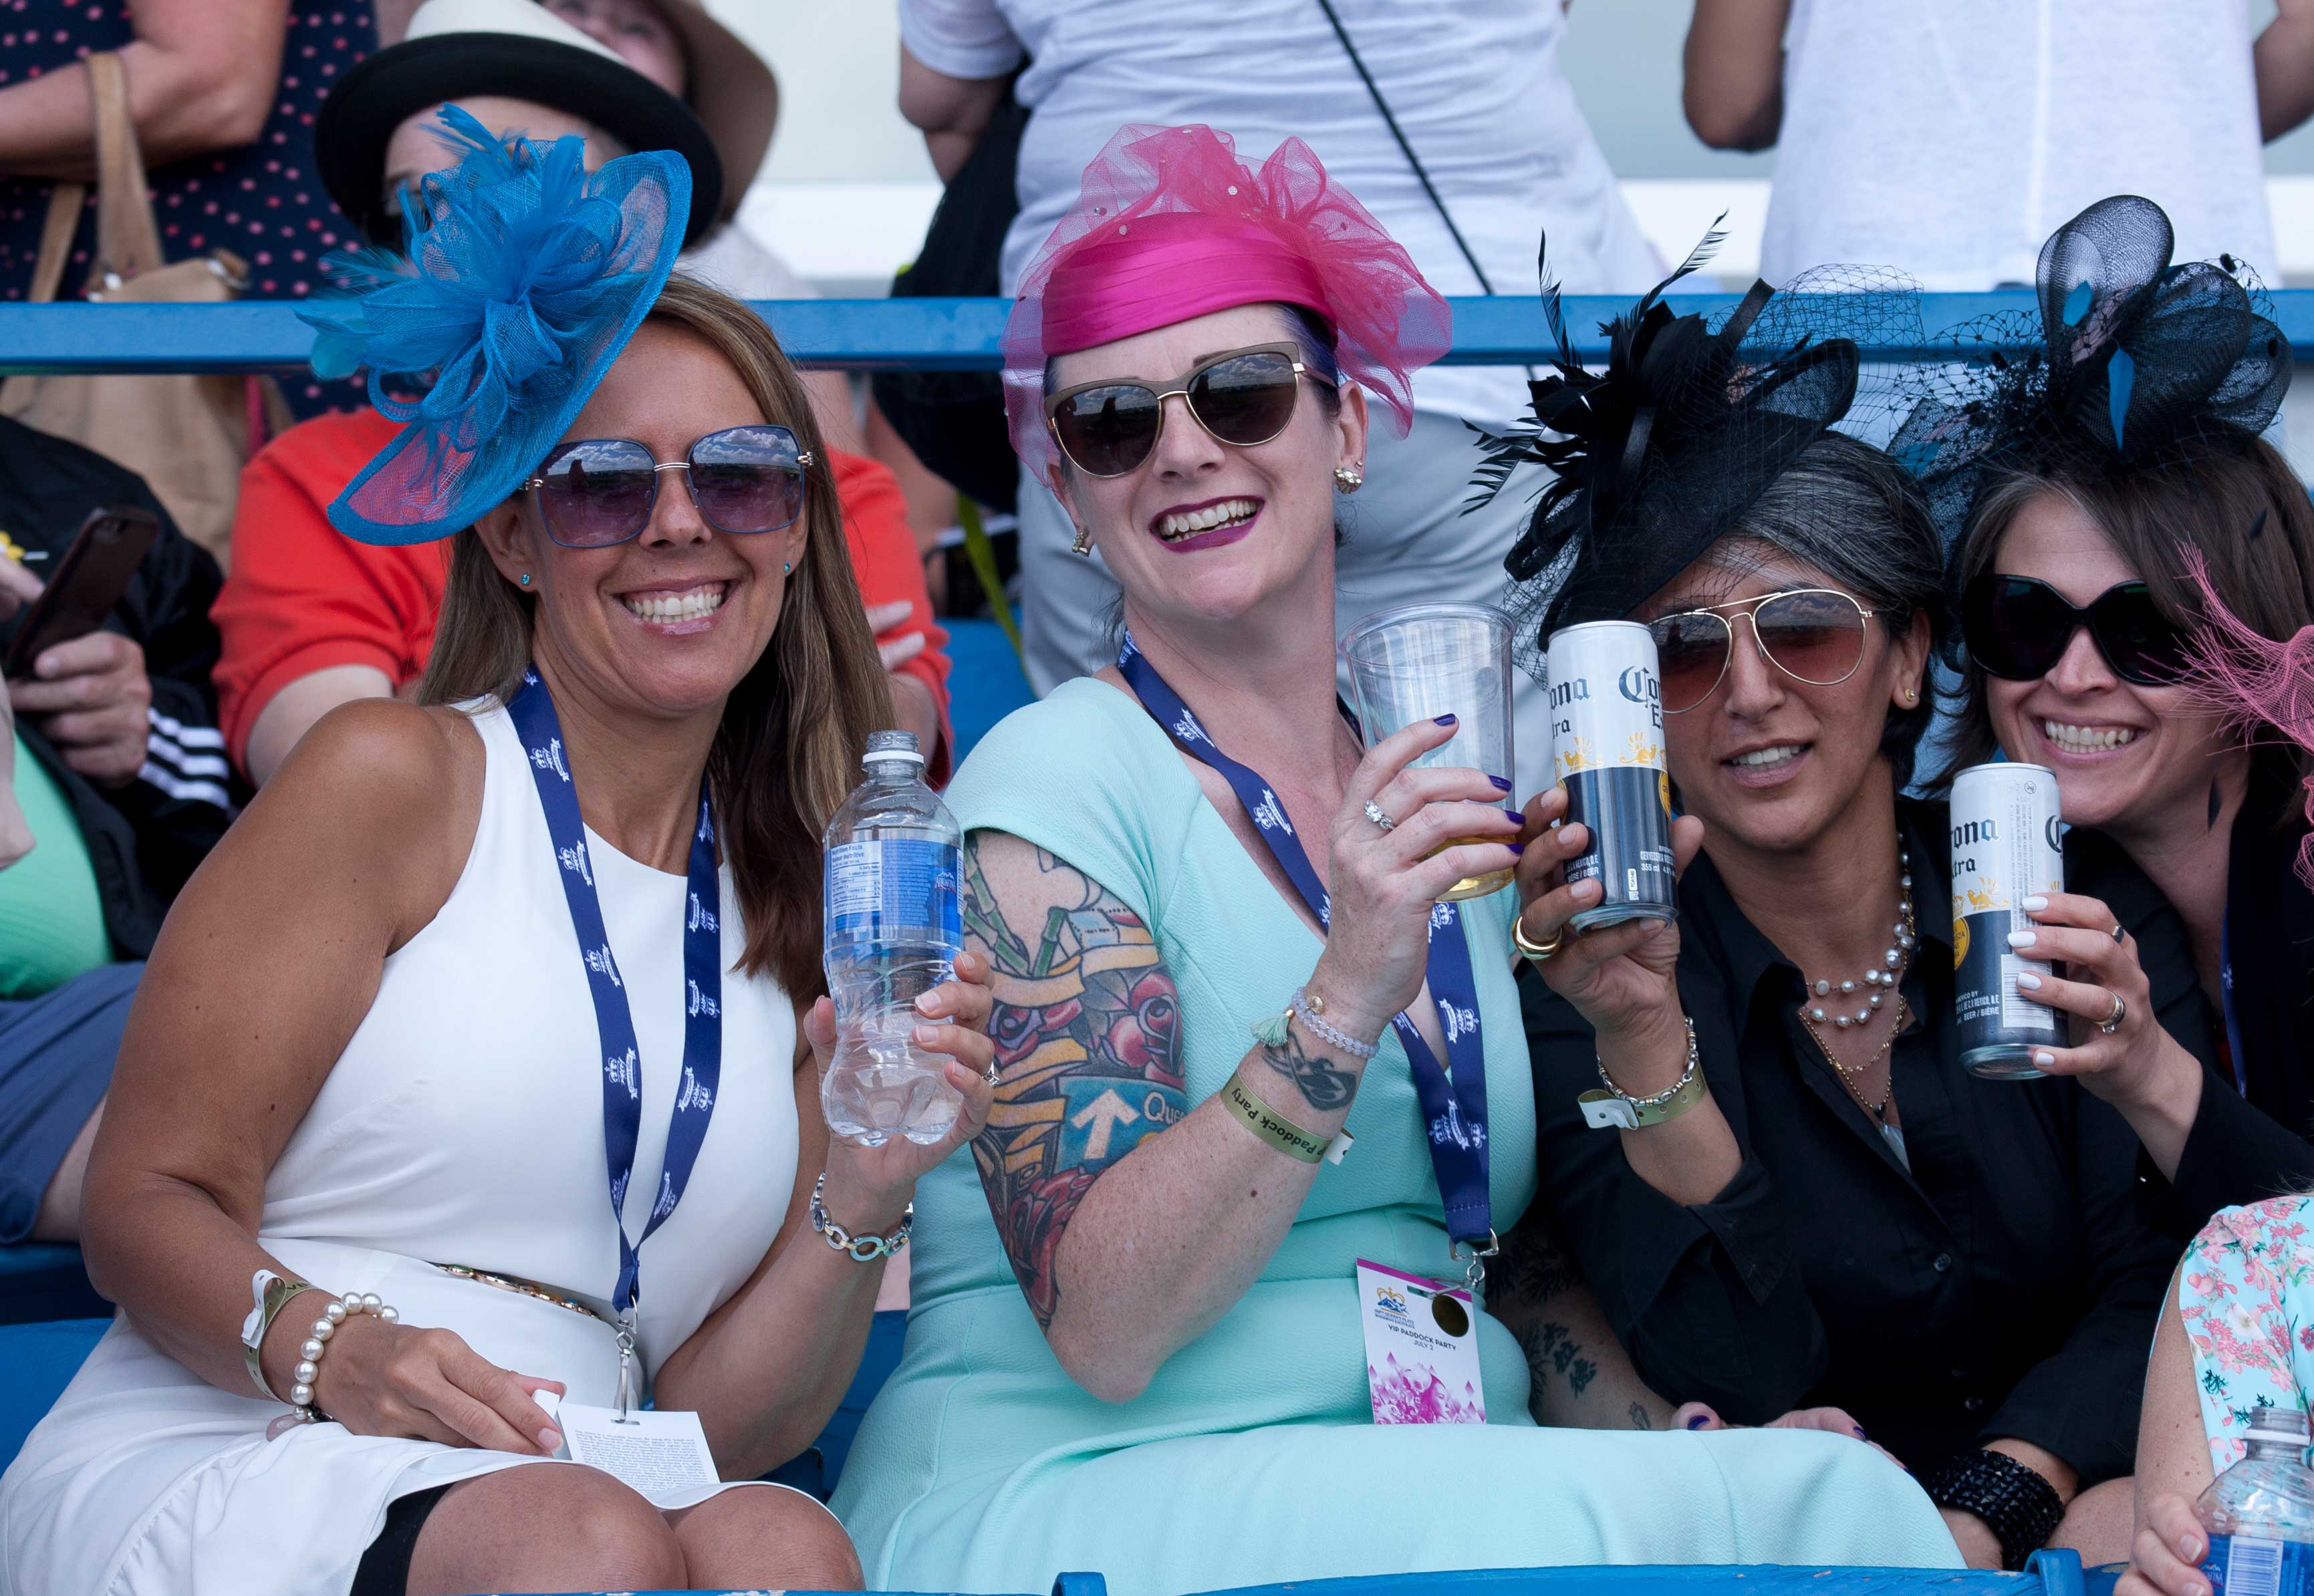 King's Plate Grandstand Tickets holders enjoying the races at Woodbine Racetrack.